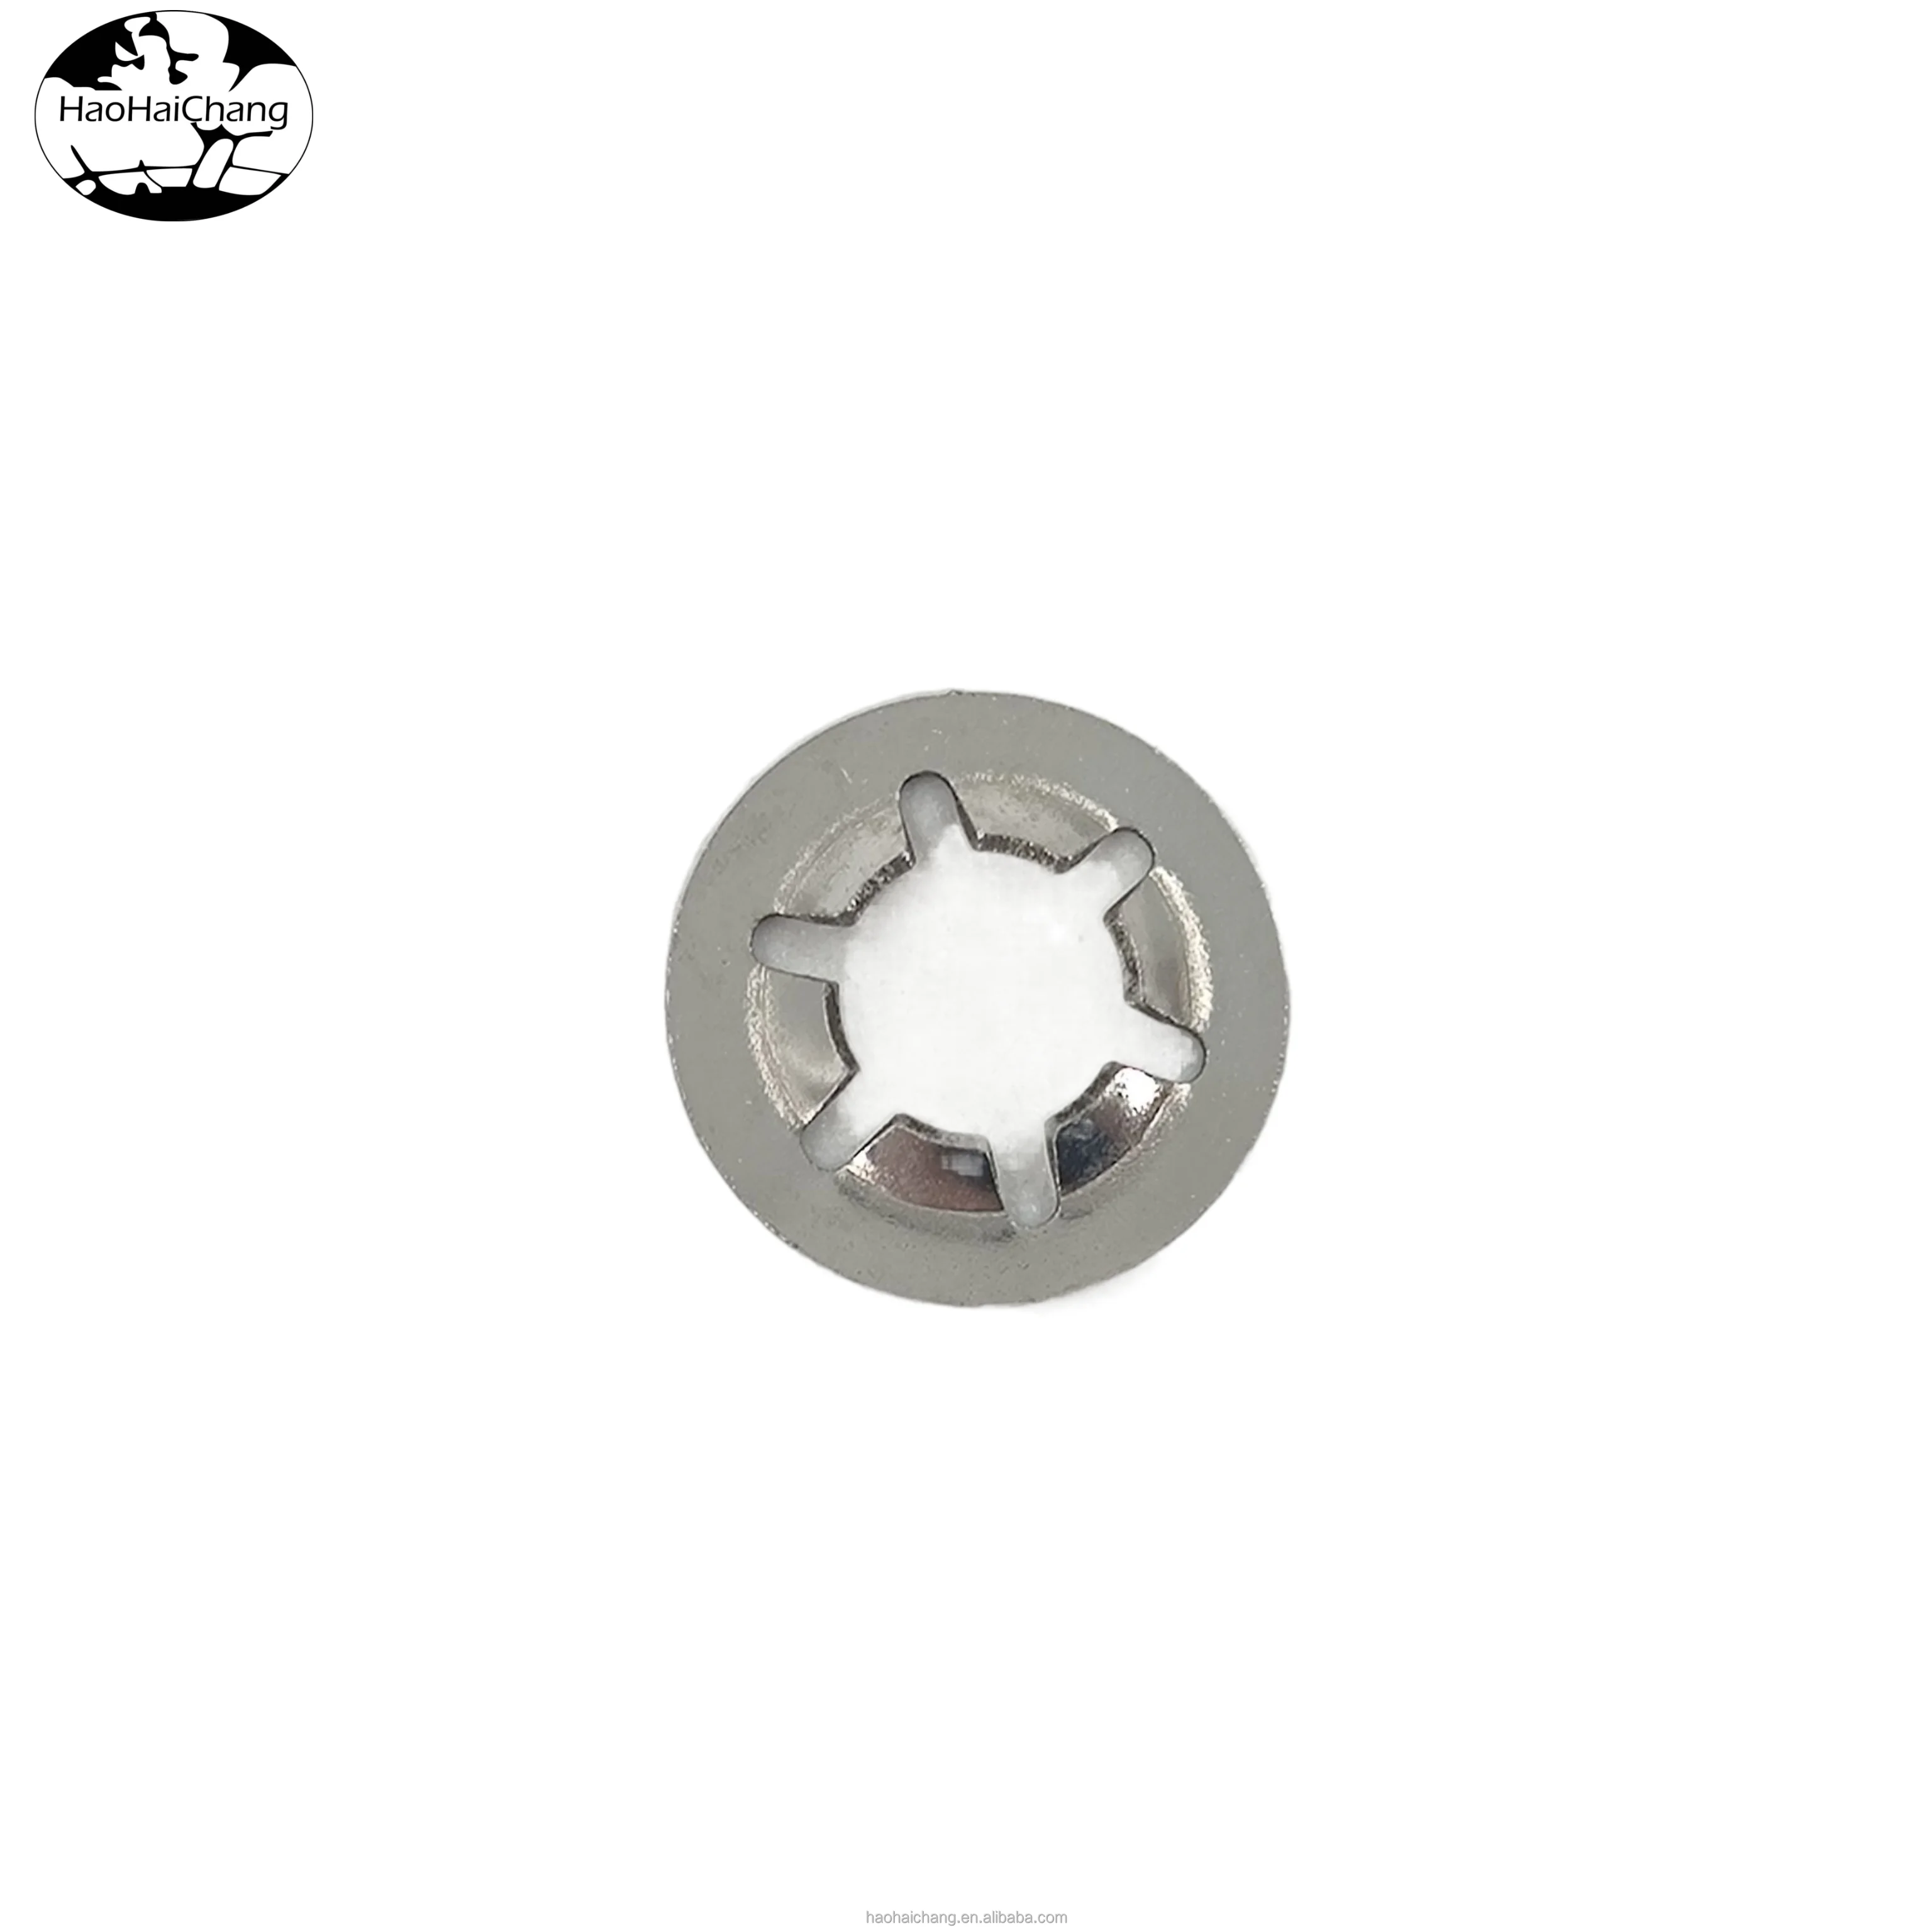 Customized precision stamping stainless steel internal gear gasket circlip plum lock washer